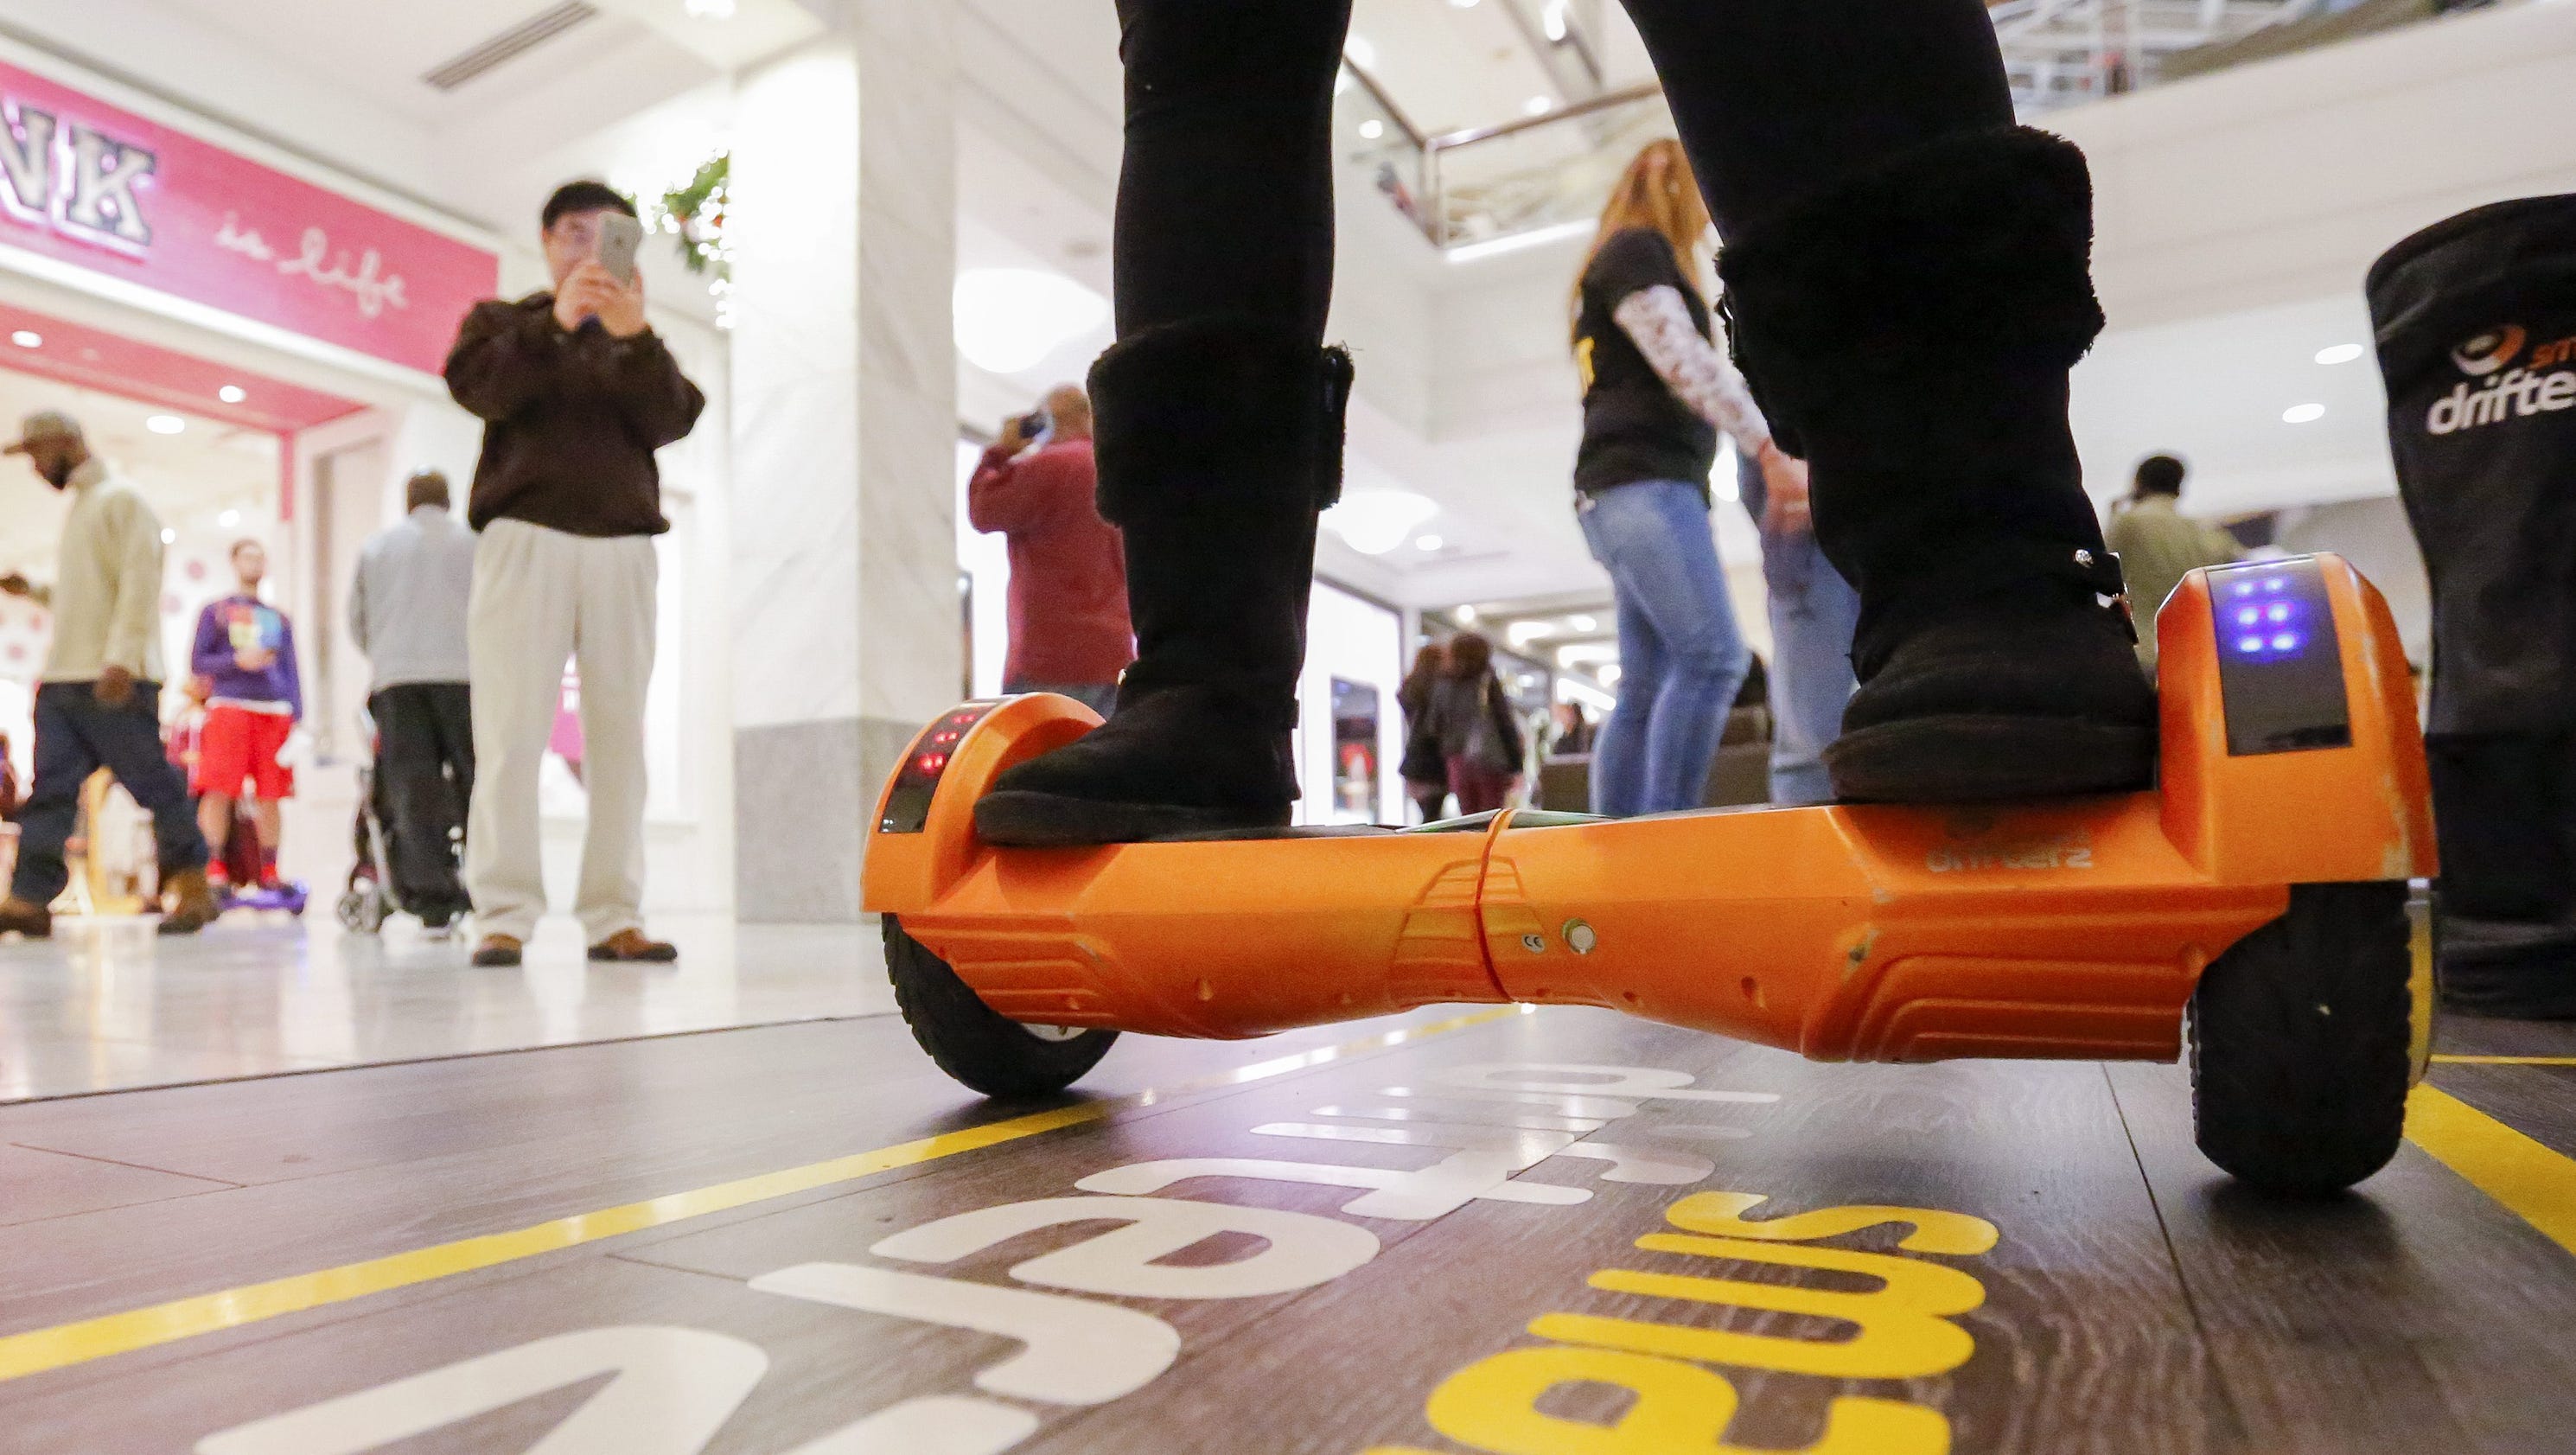 Hoverboard 101: What you need to know